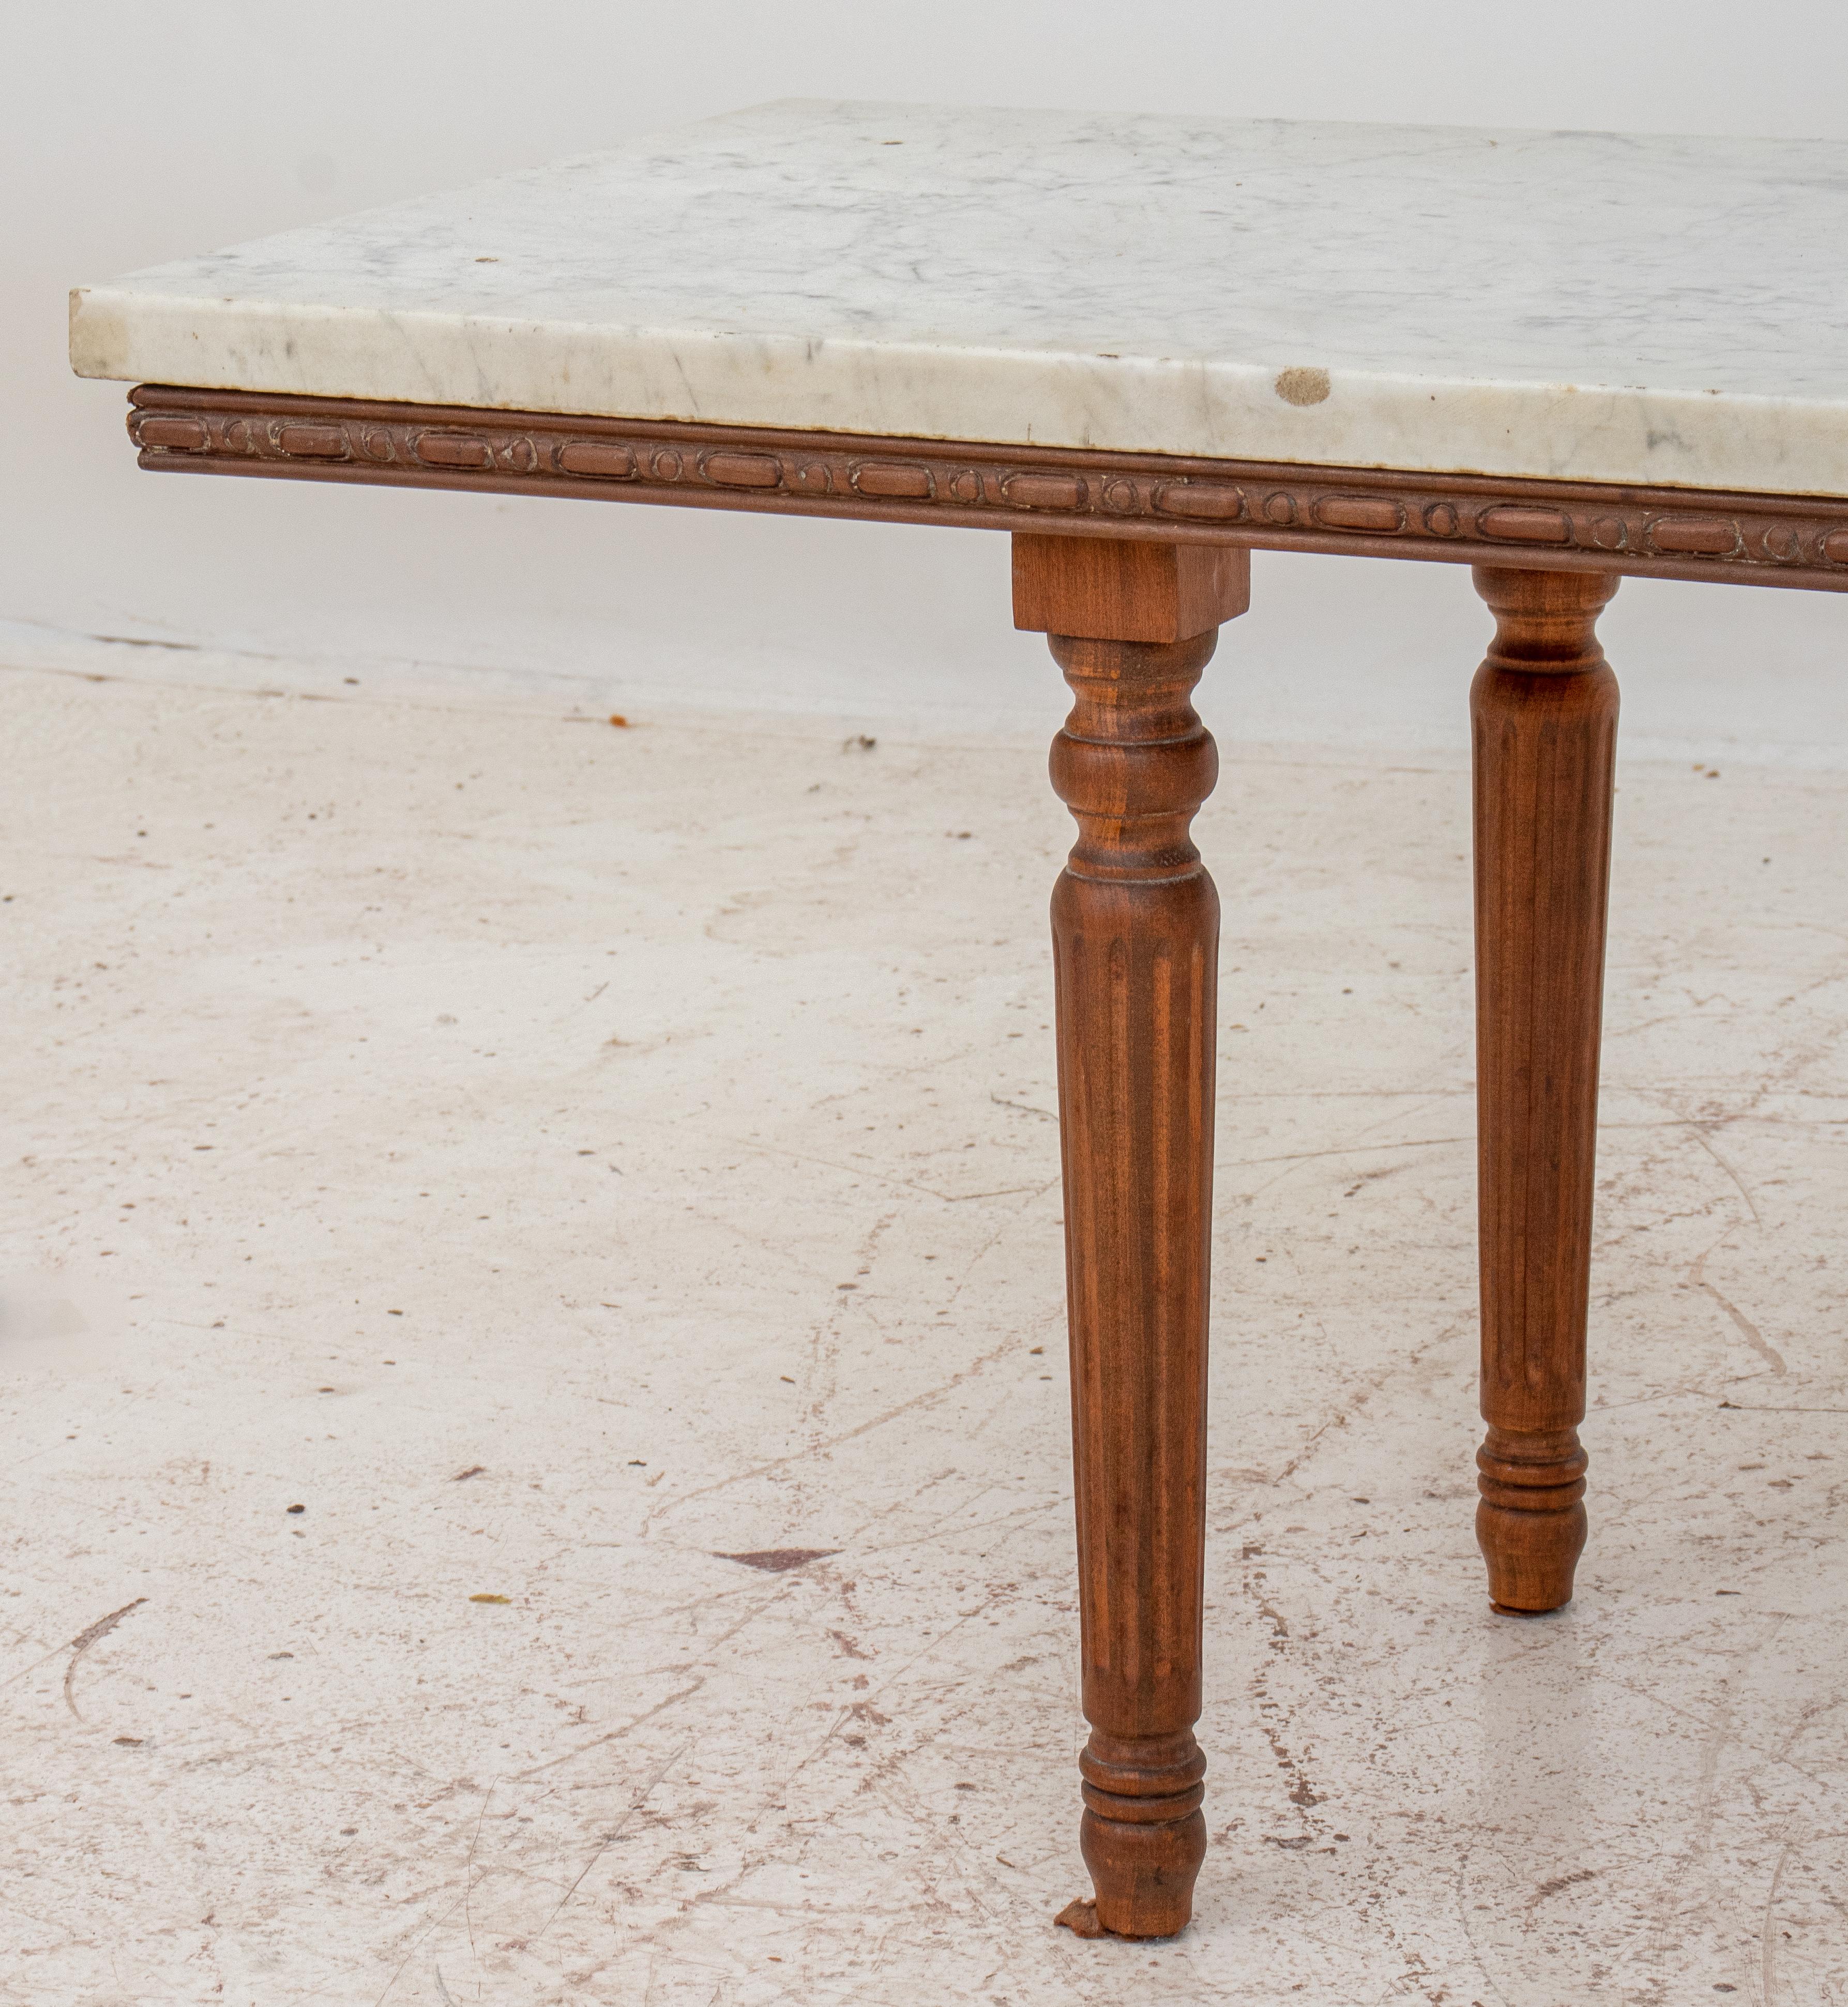 20th Century Neoclassical Style Low Table with Marble Top